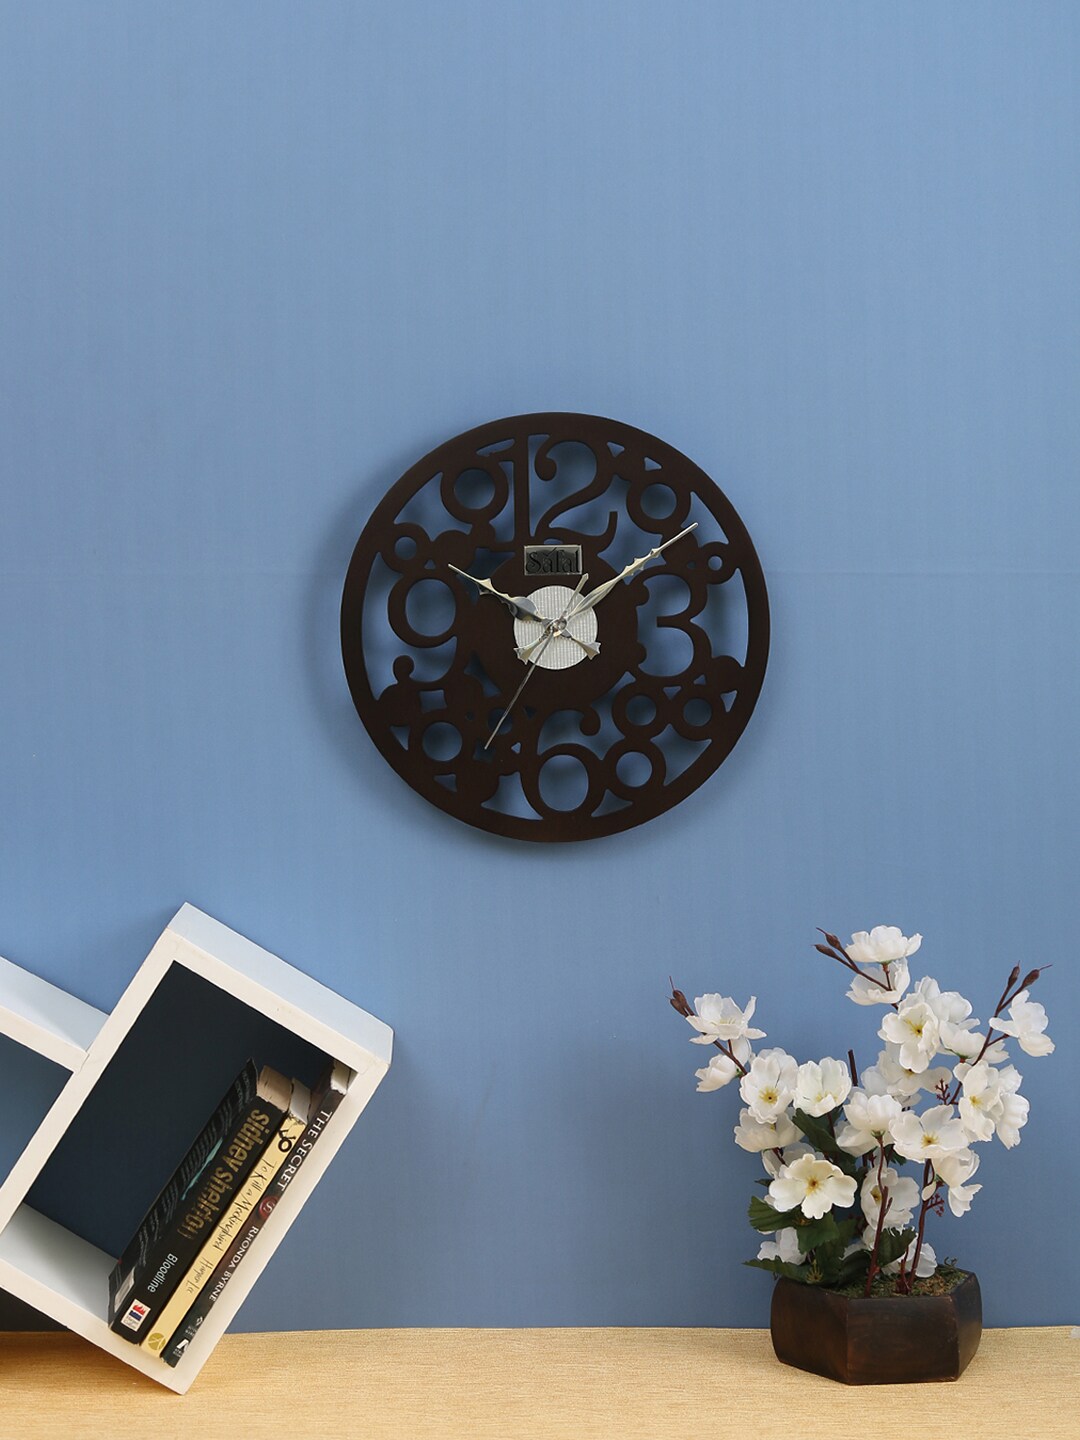 Safal Black Solid Dial Round Analogue Wall Clock Price in India